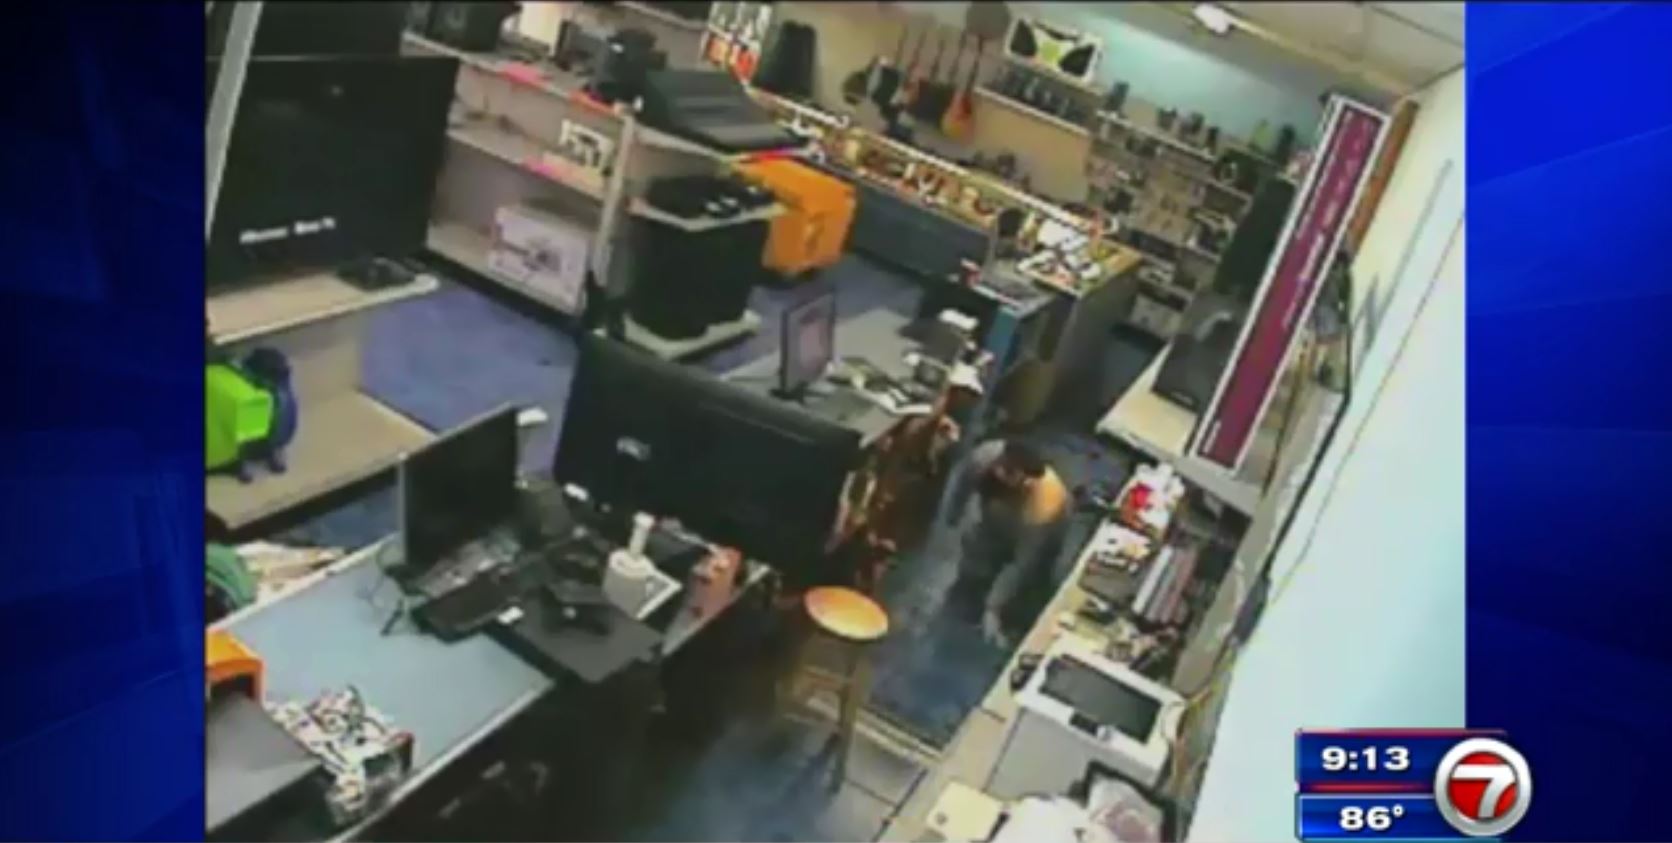 Crawling Crook Ties Up Pawn Shop Employees During Robbery In Lauderdale Lakes Wsvn 7news